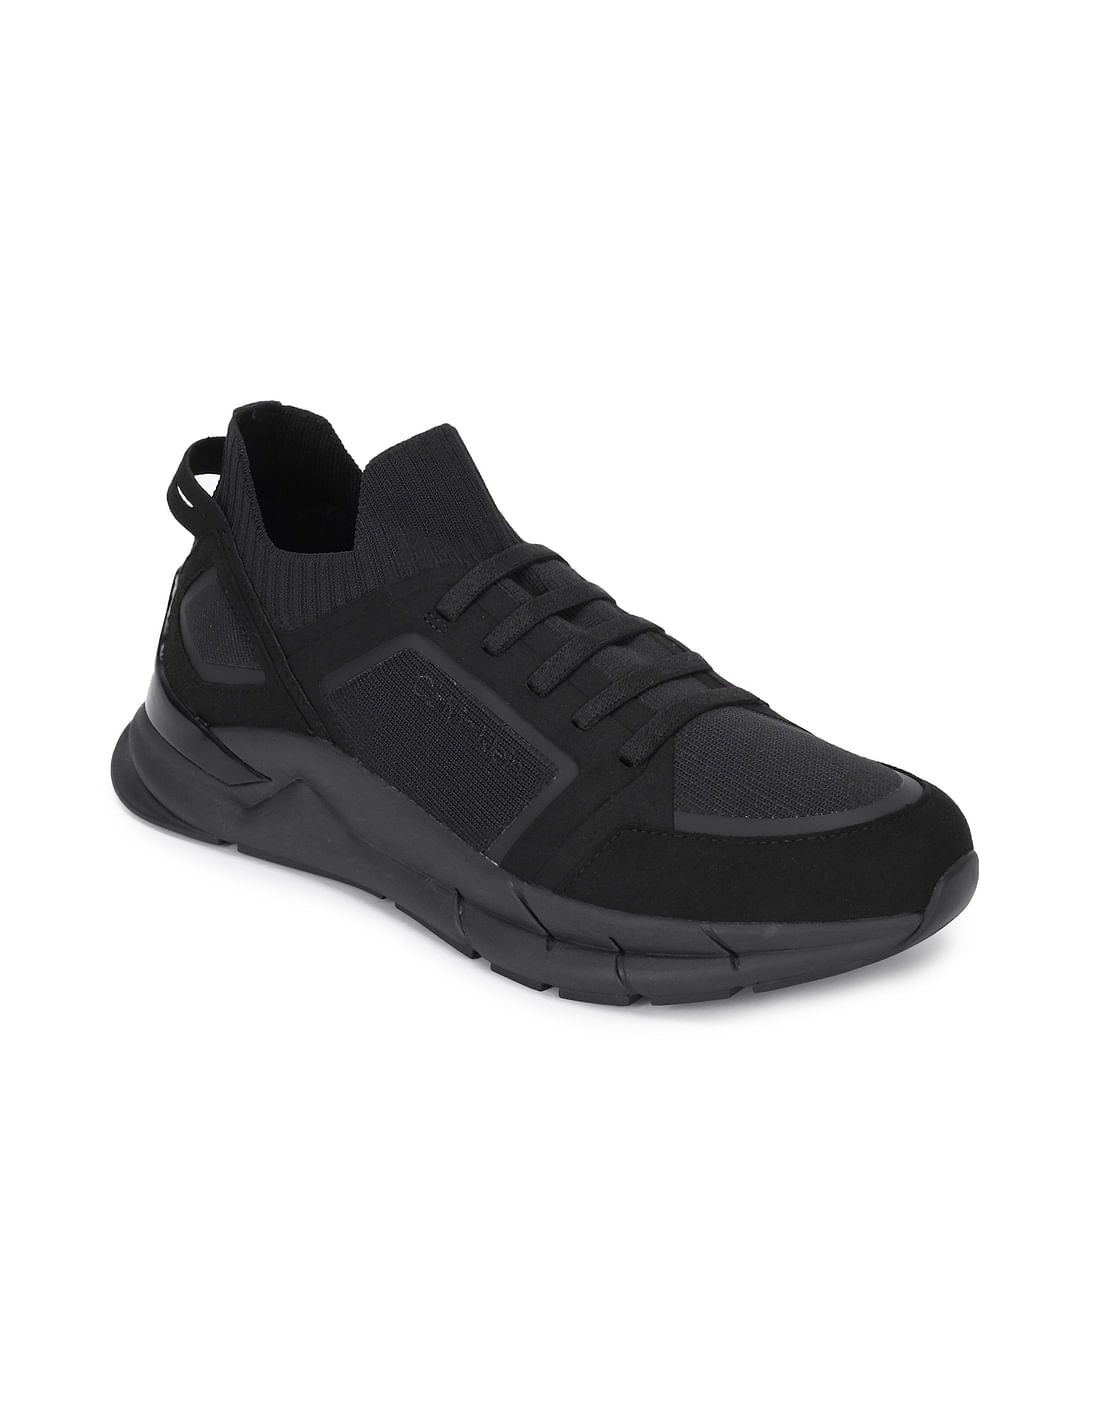 Buy Calvin Klein Men Black Lace Up Low Top Sneakers - NNNOW.com